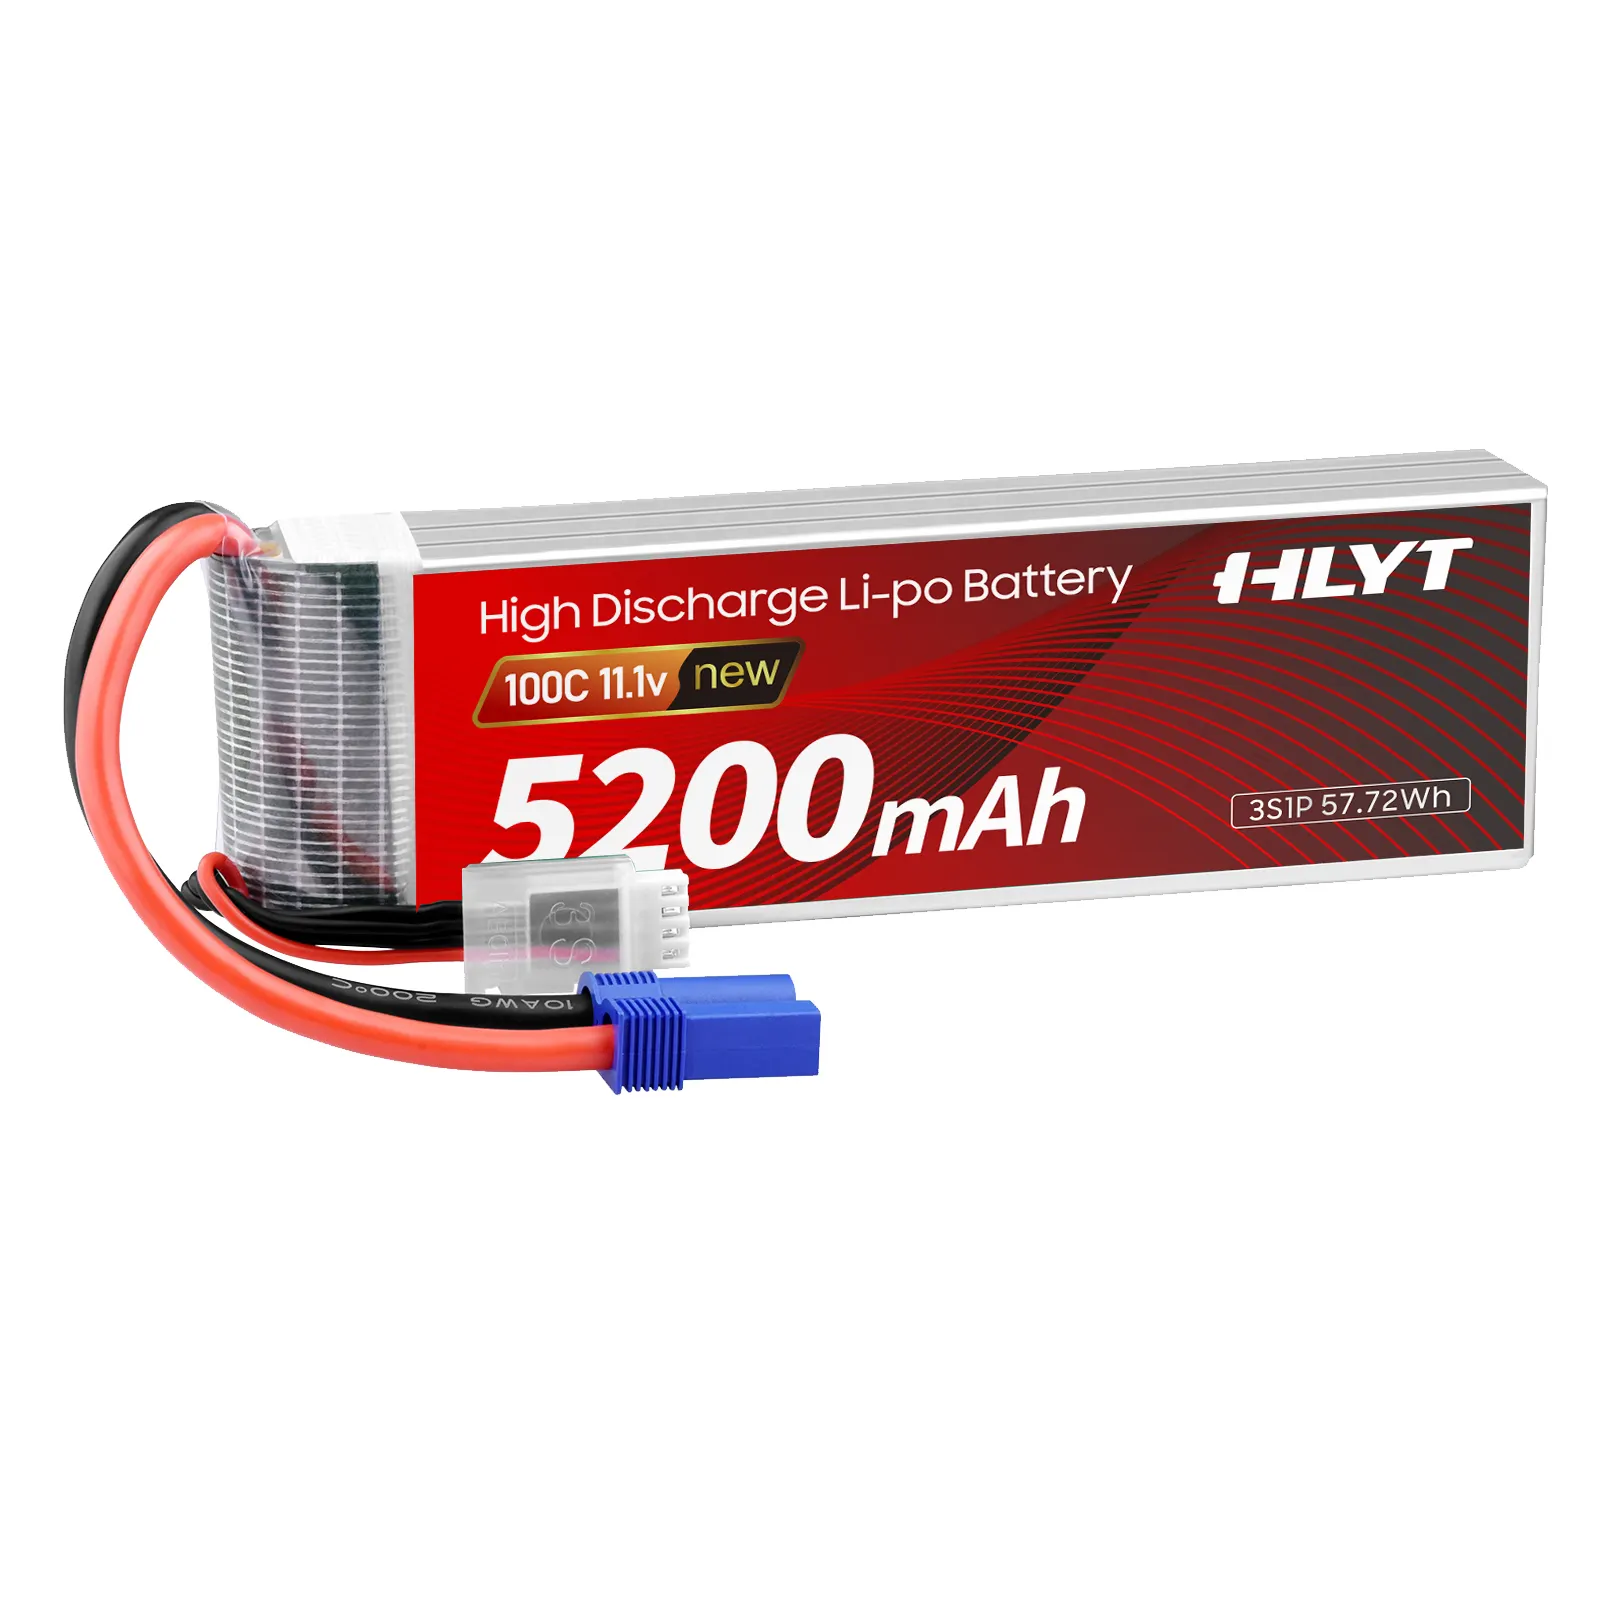 HLYT Lipo Battery 7.4V 5200mAh 50C Hard case Battery with Deans T Plug for RC Truck RC Truggy RC Heli Airplane Drone FPV Racing